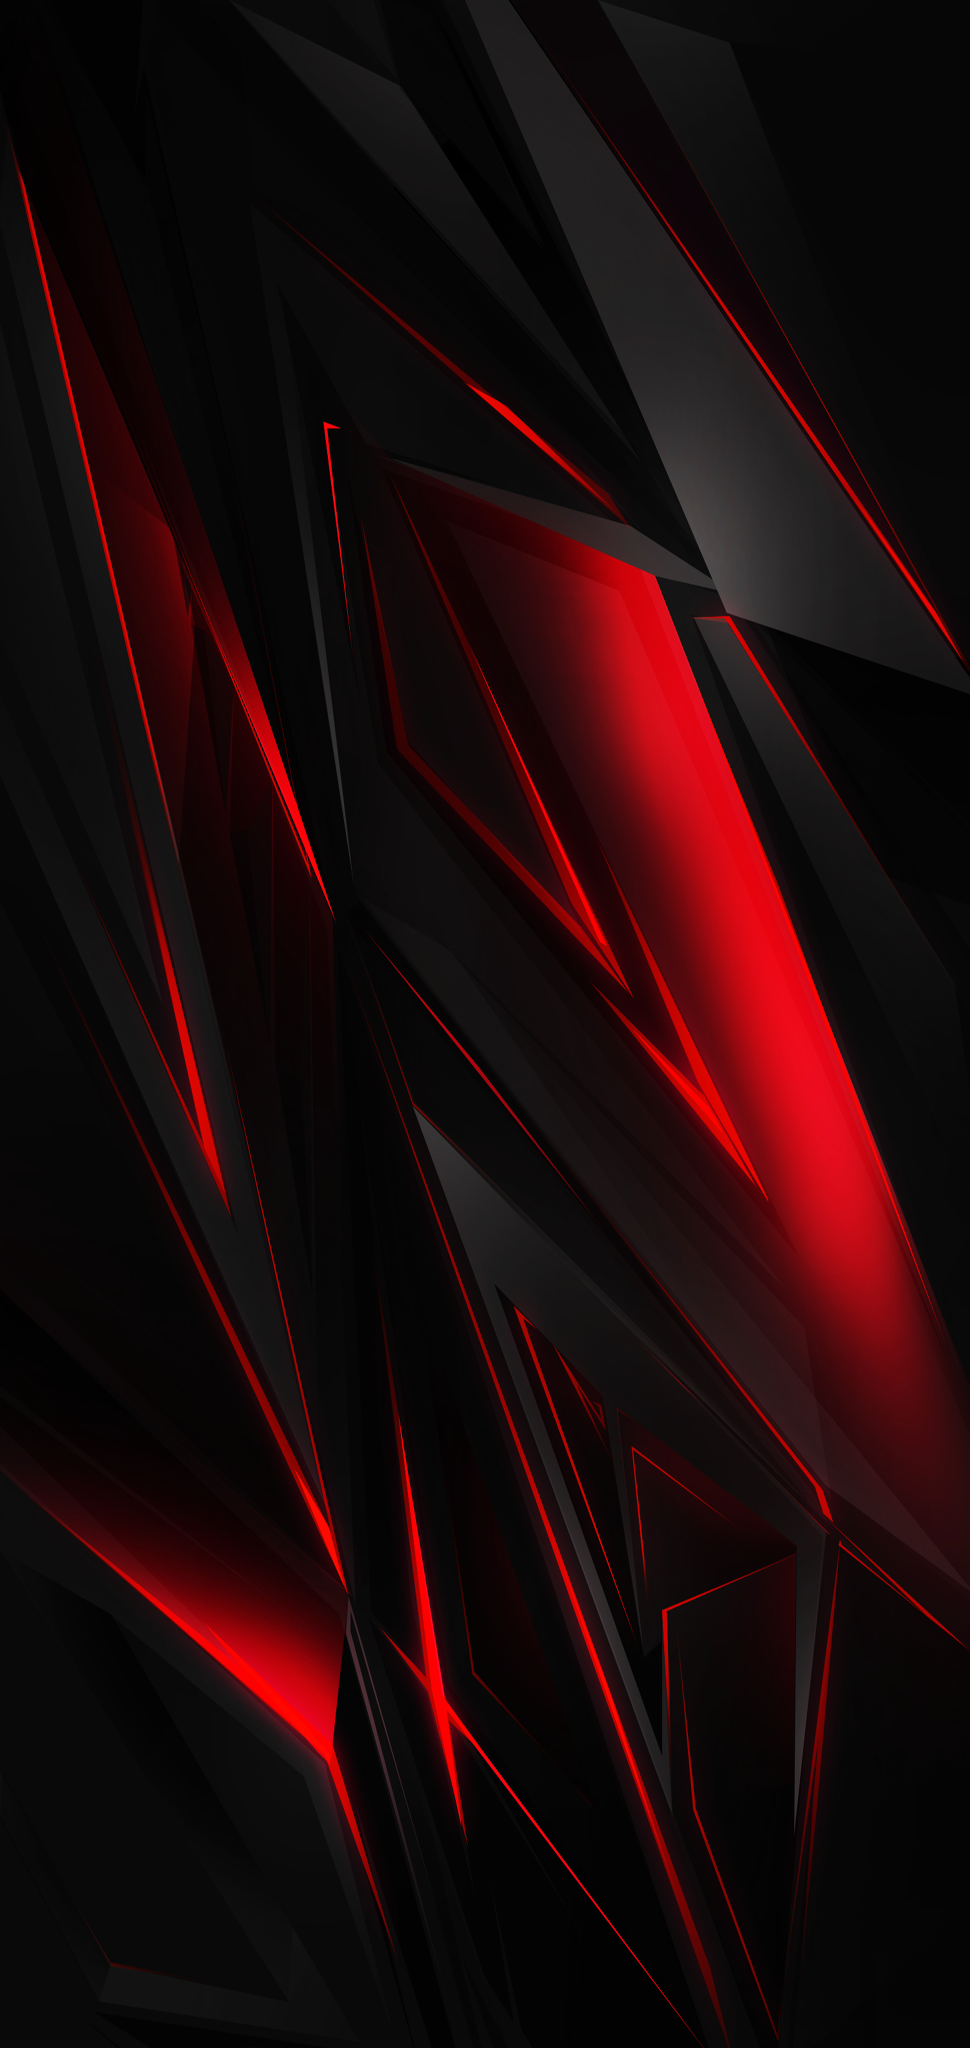 AMOLED Black and red abstract wallpaper didn't make this, but